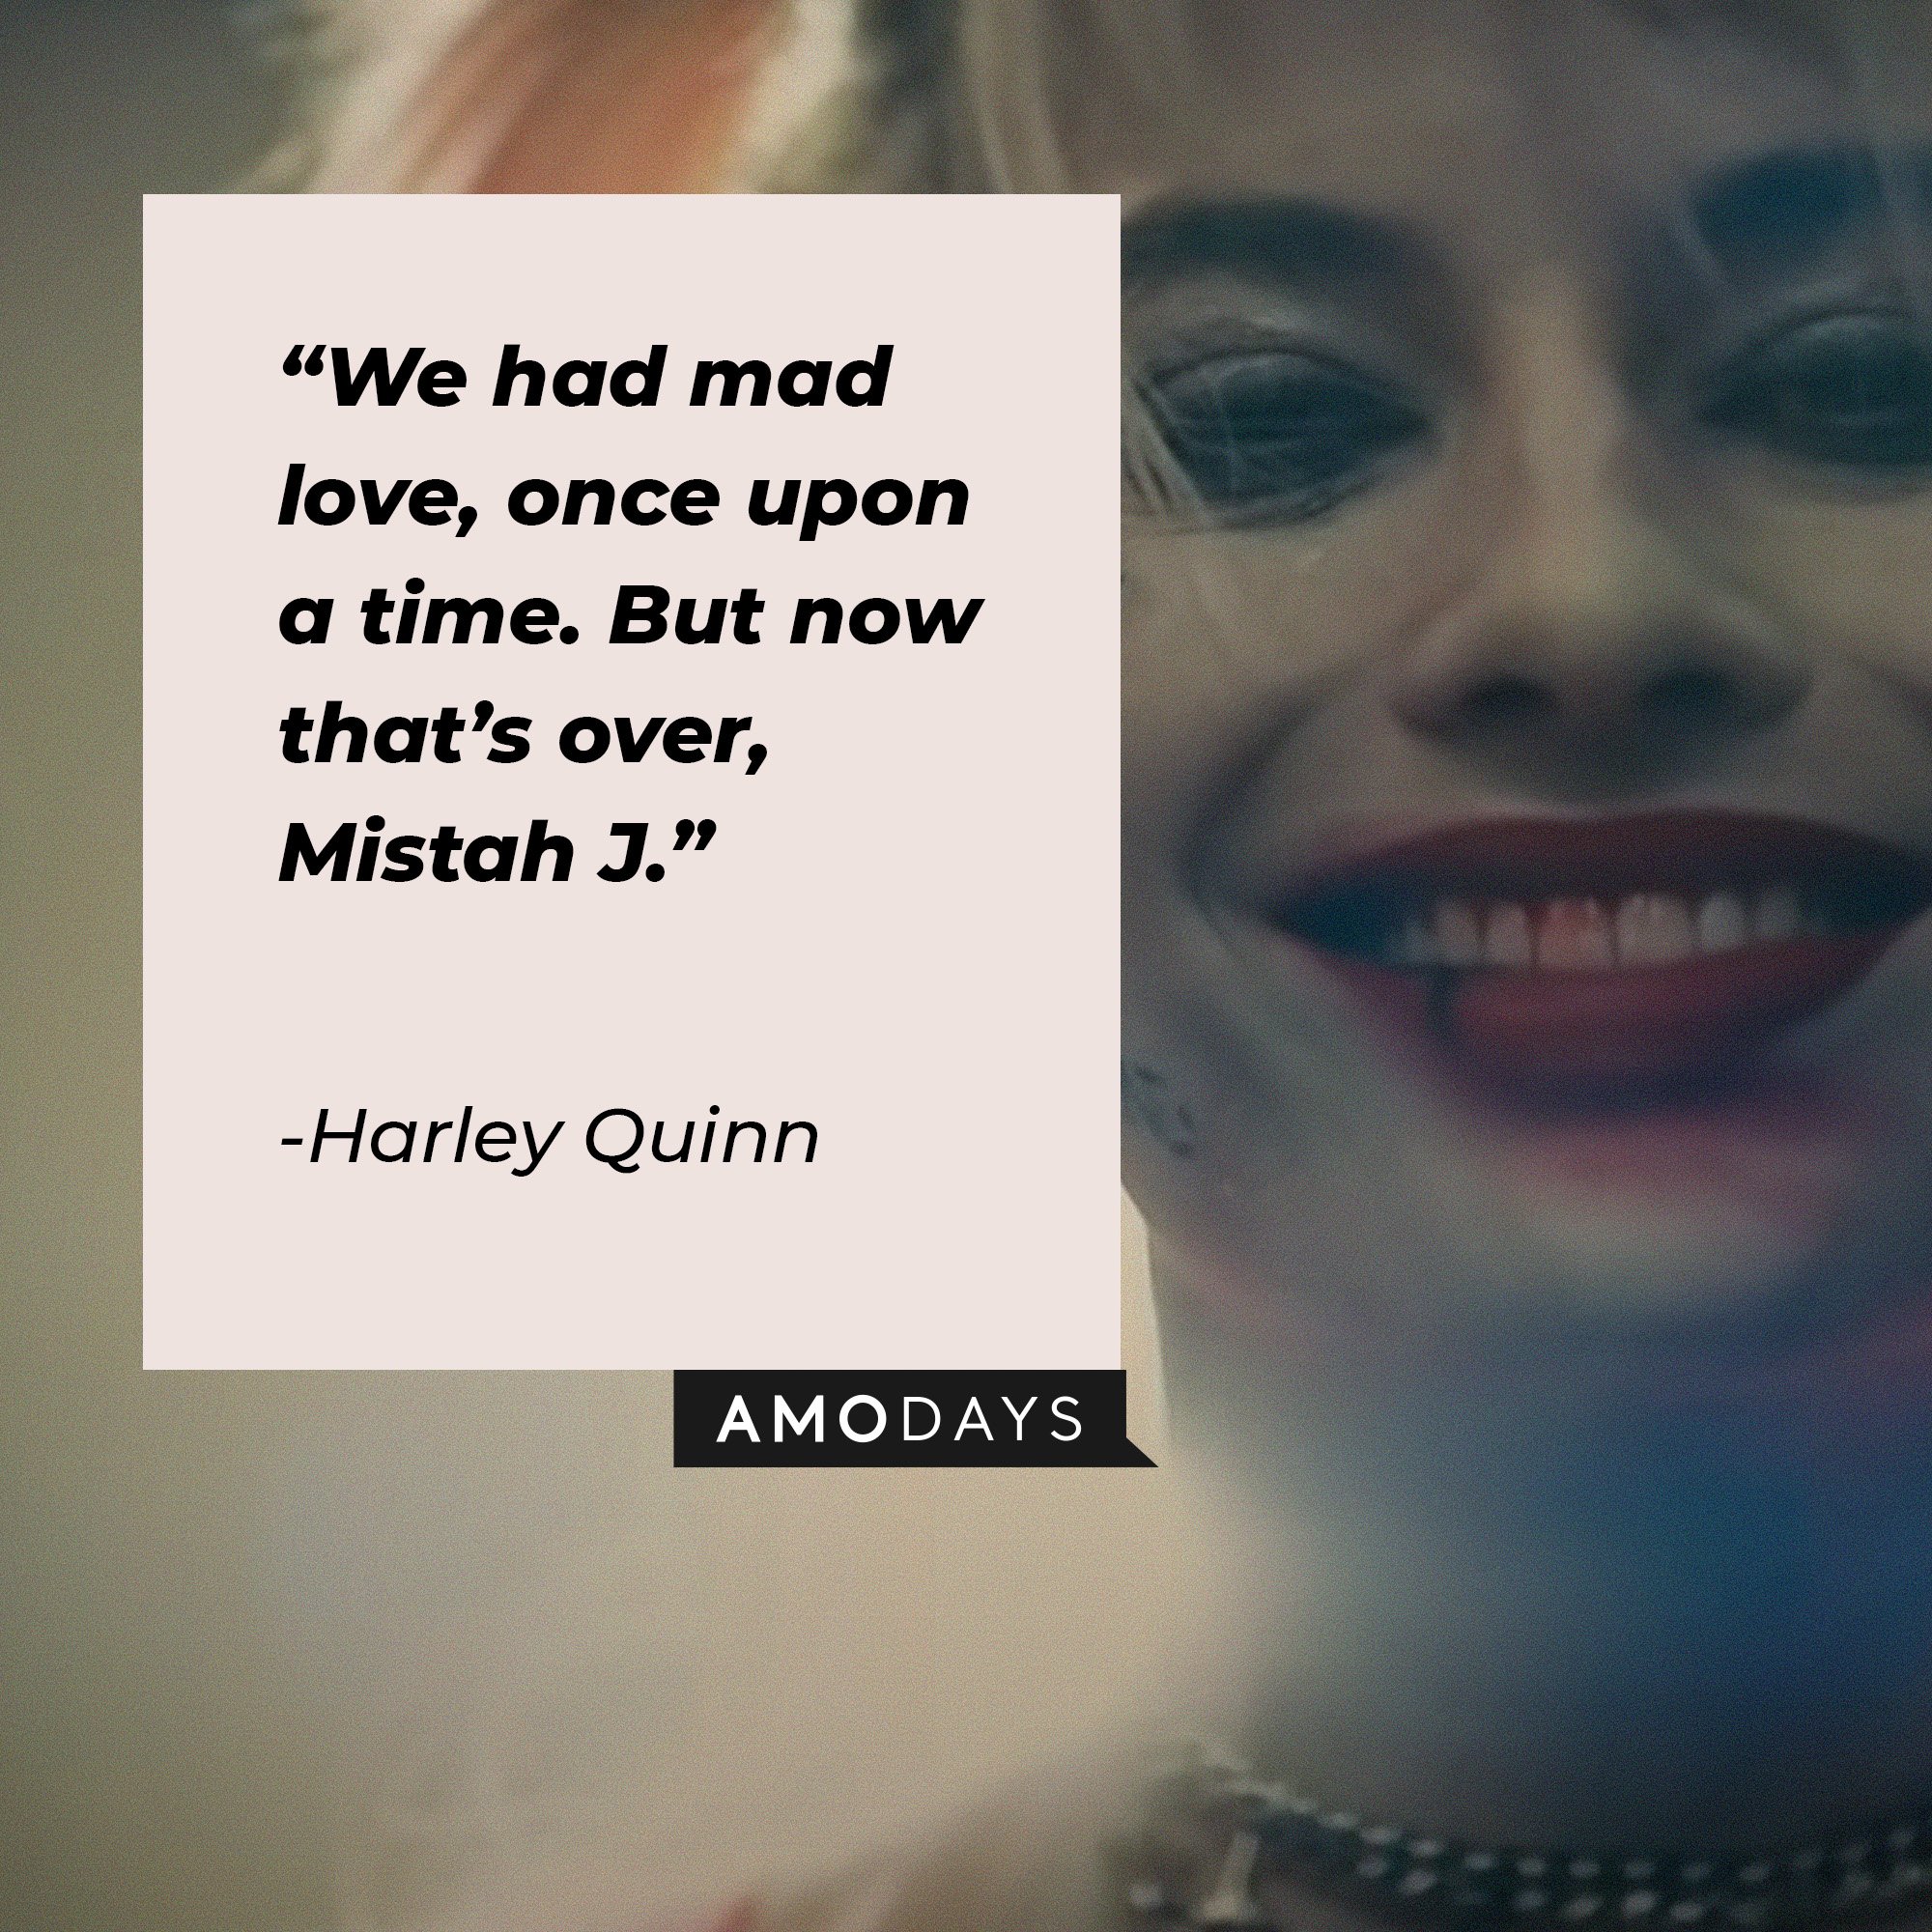 Harley Quinn’s quote: "We had mad love, once upon a time. But now that’s over, Mistah J." | Source: Image: AmoDays